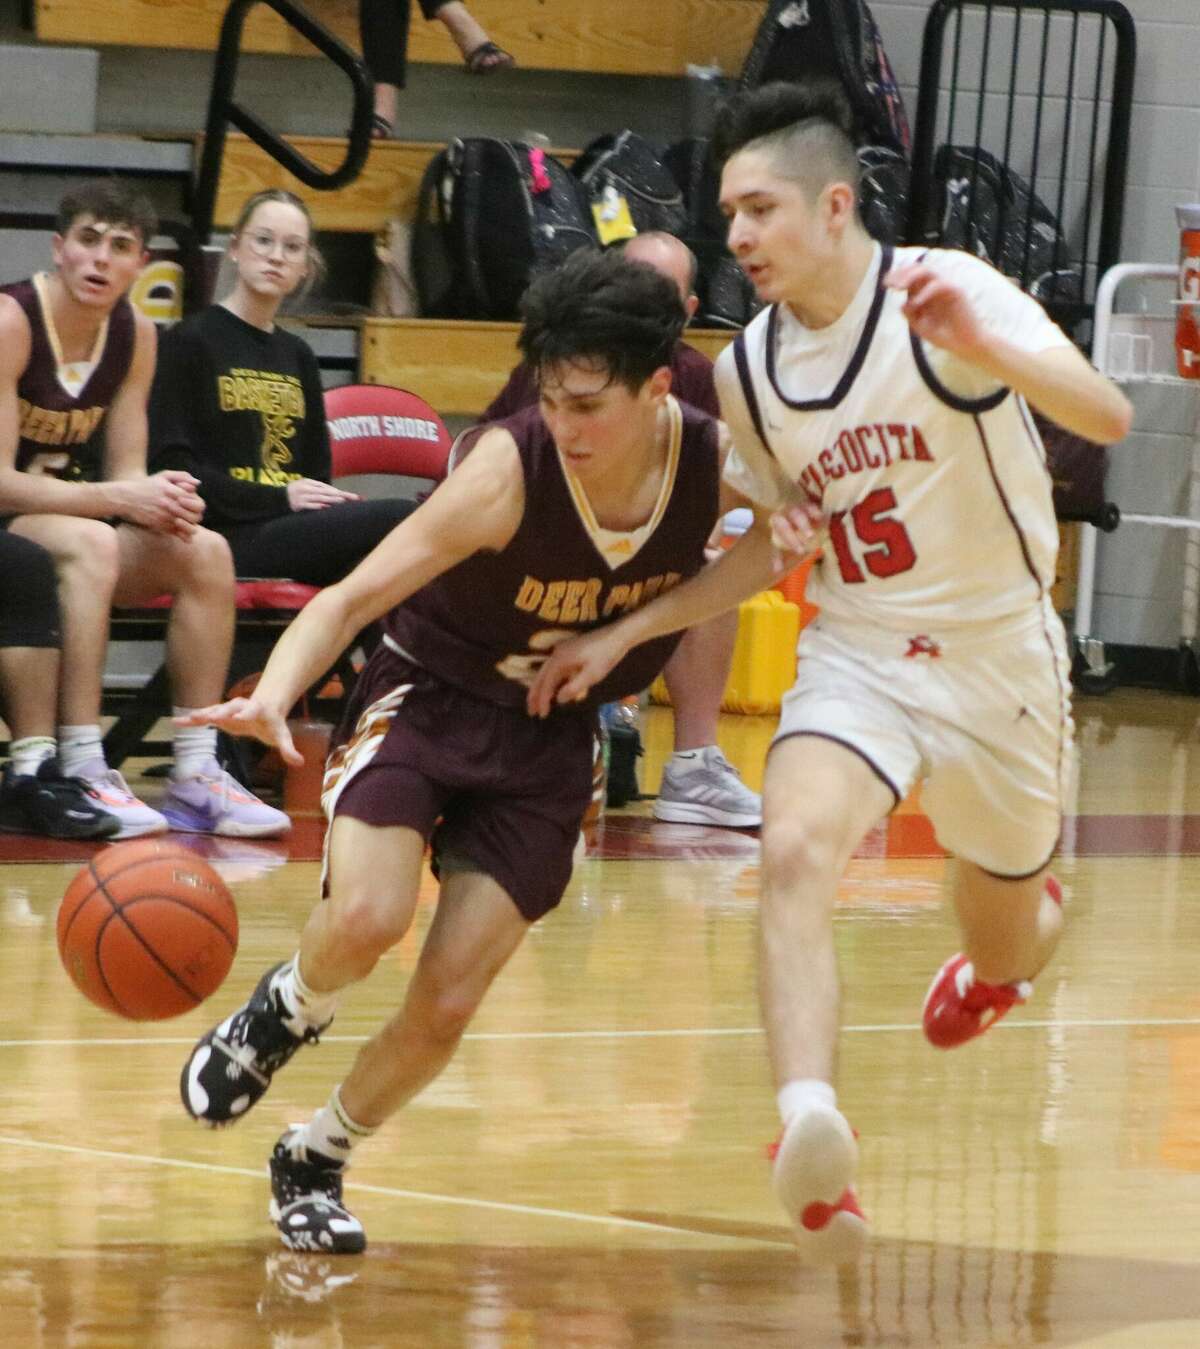   Deer Park's Andrew Aguilar crosses the mid-court stripe despite the defense of Atascocita's Luke Martinez during first-half action Tuesday night.